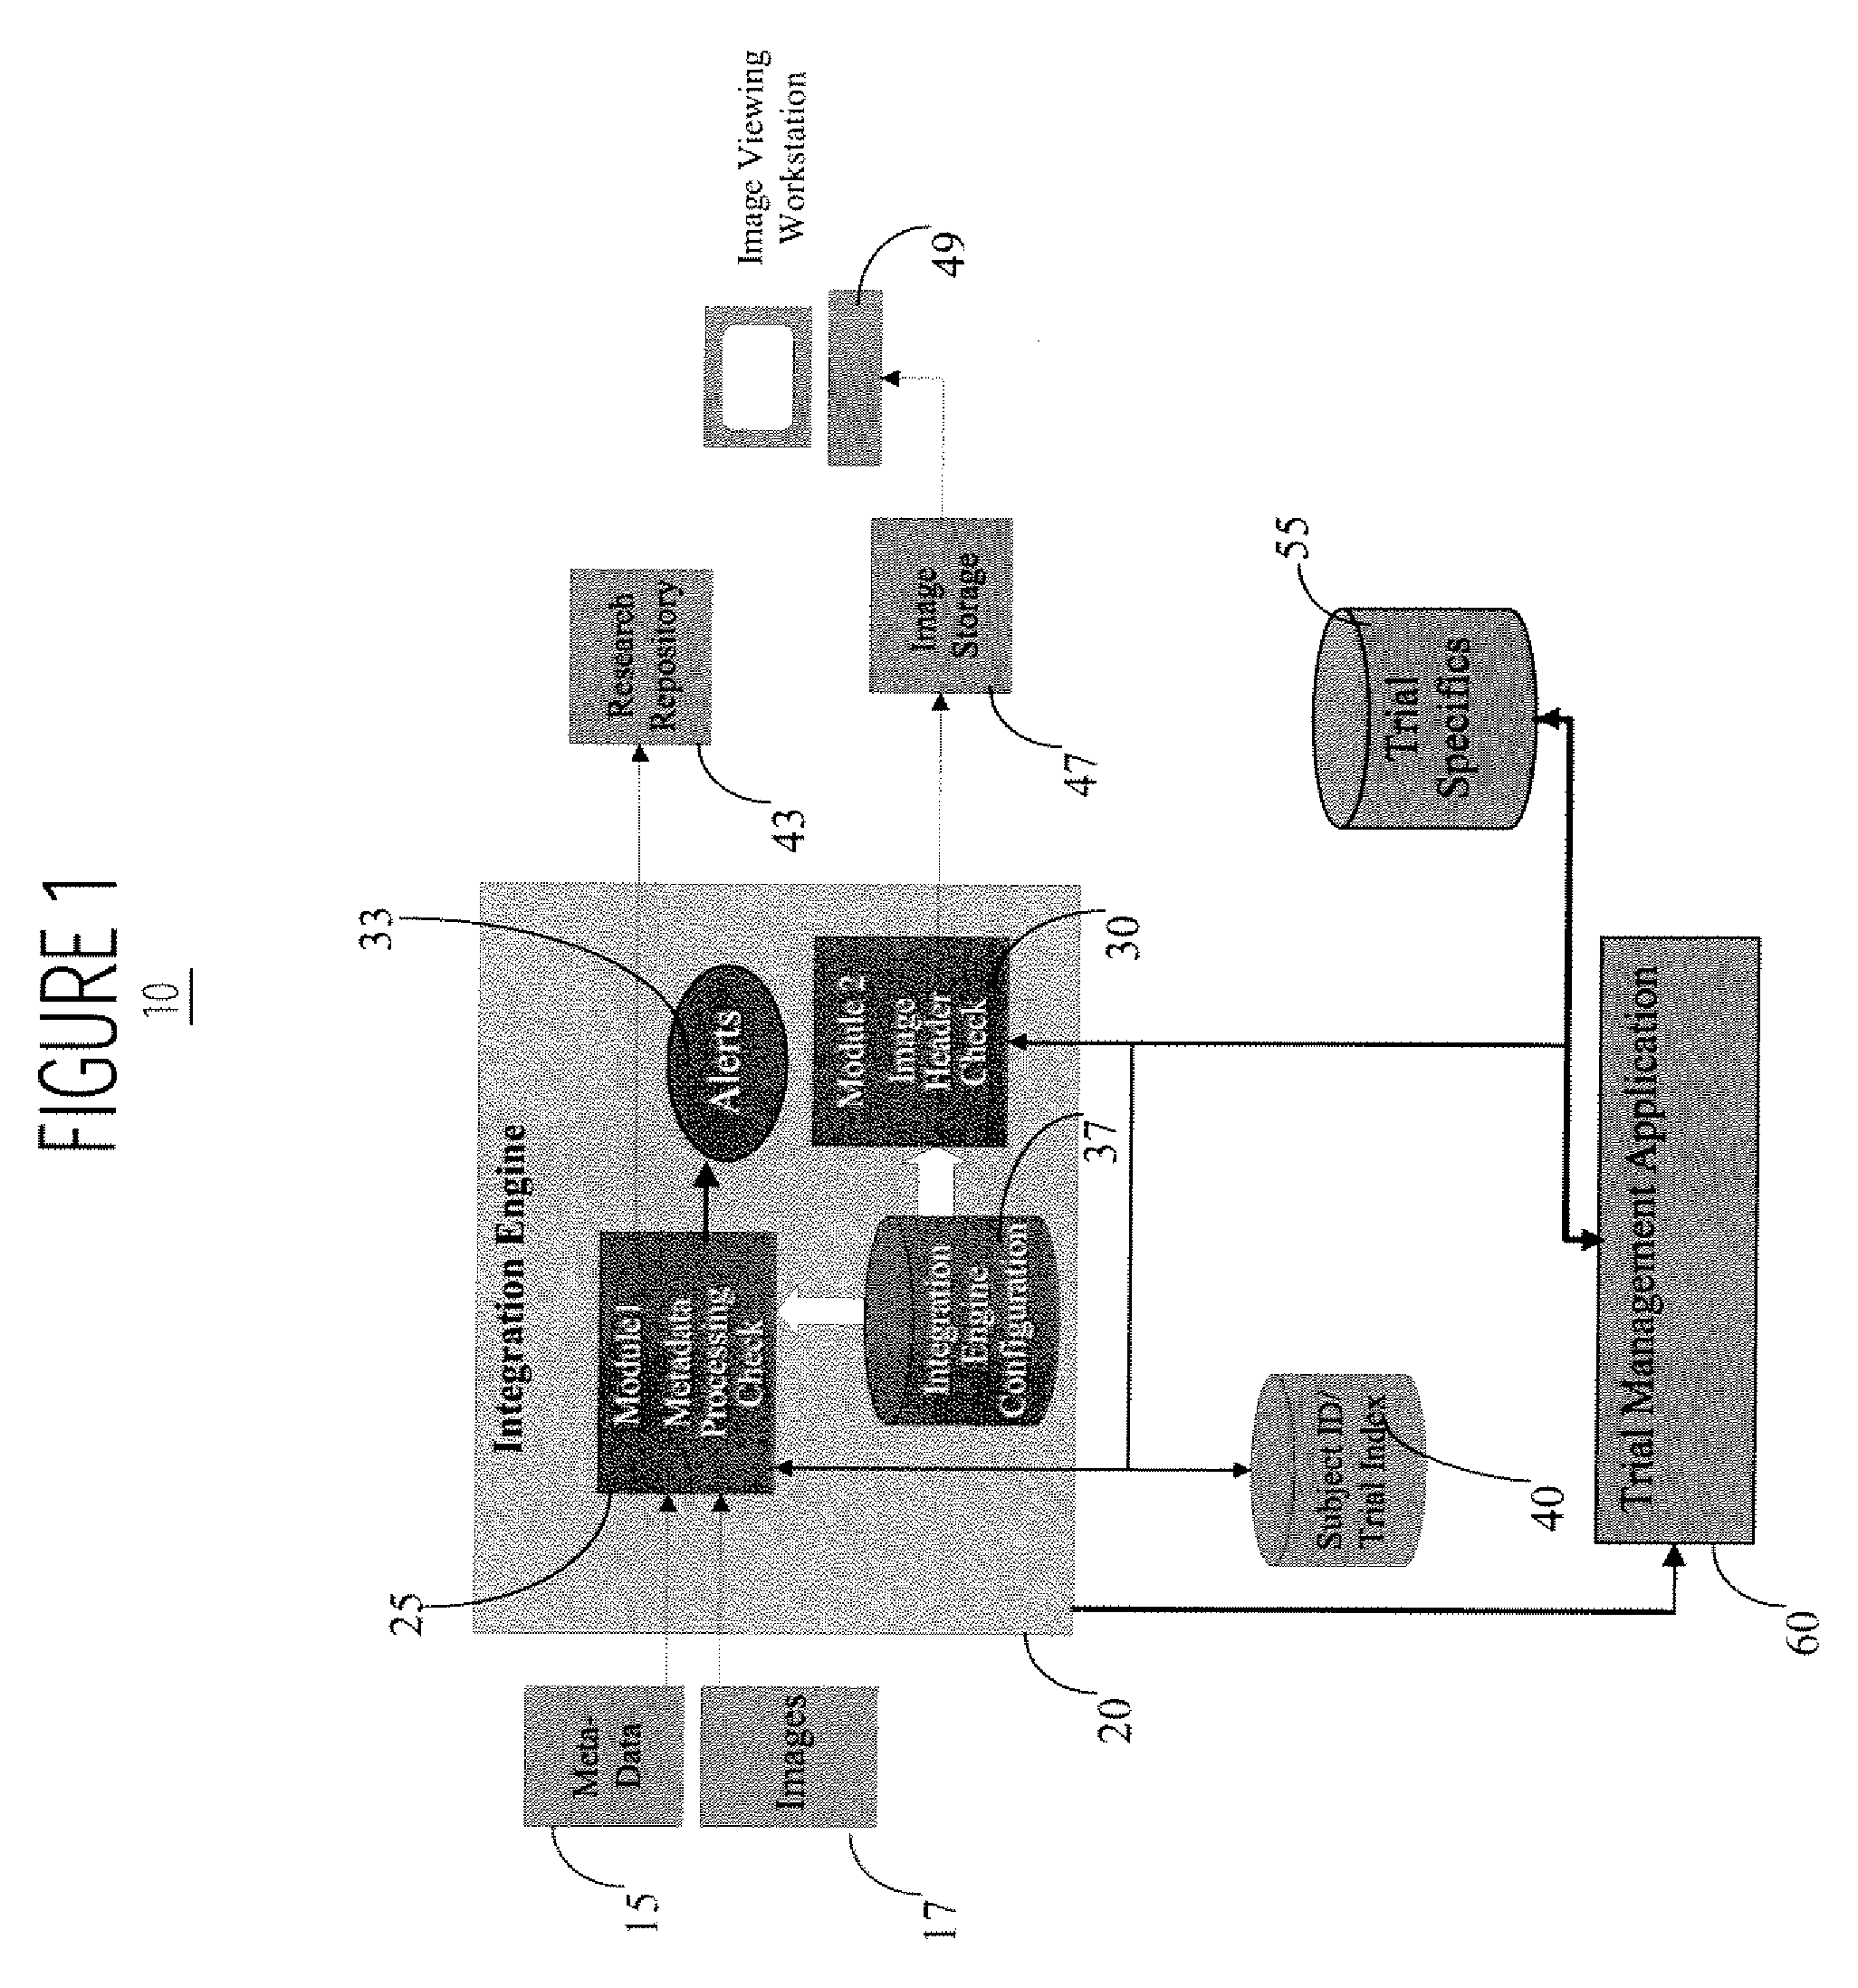 Clinical Trial Data Processing System